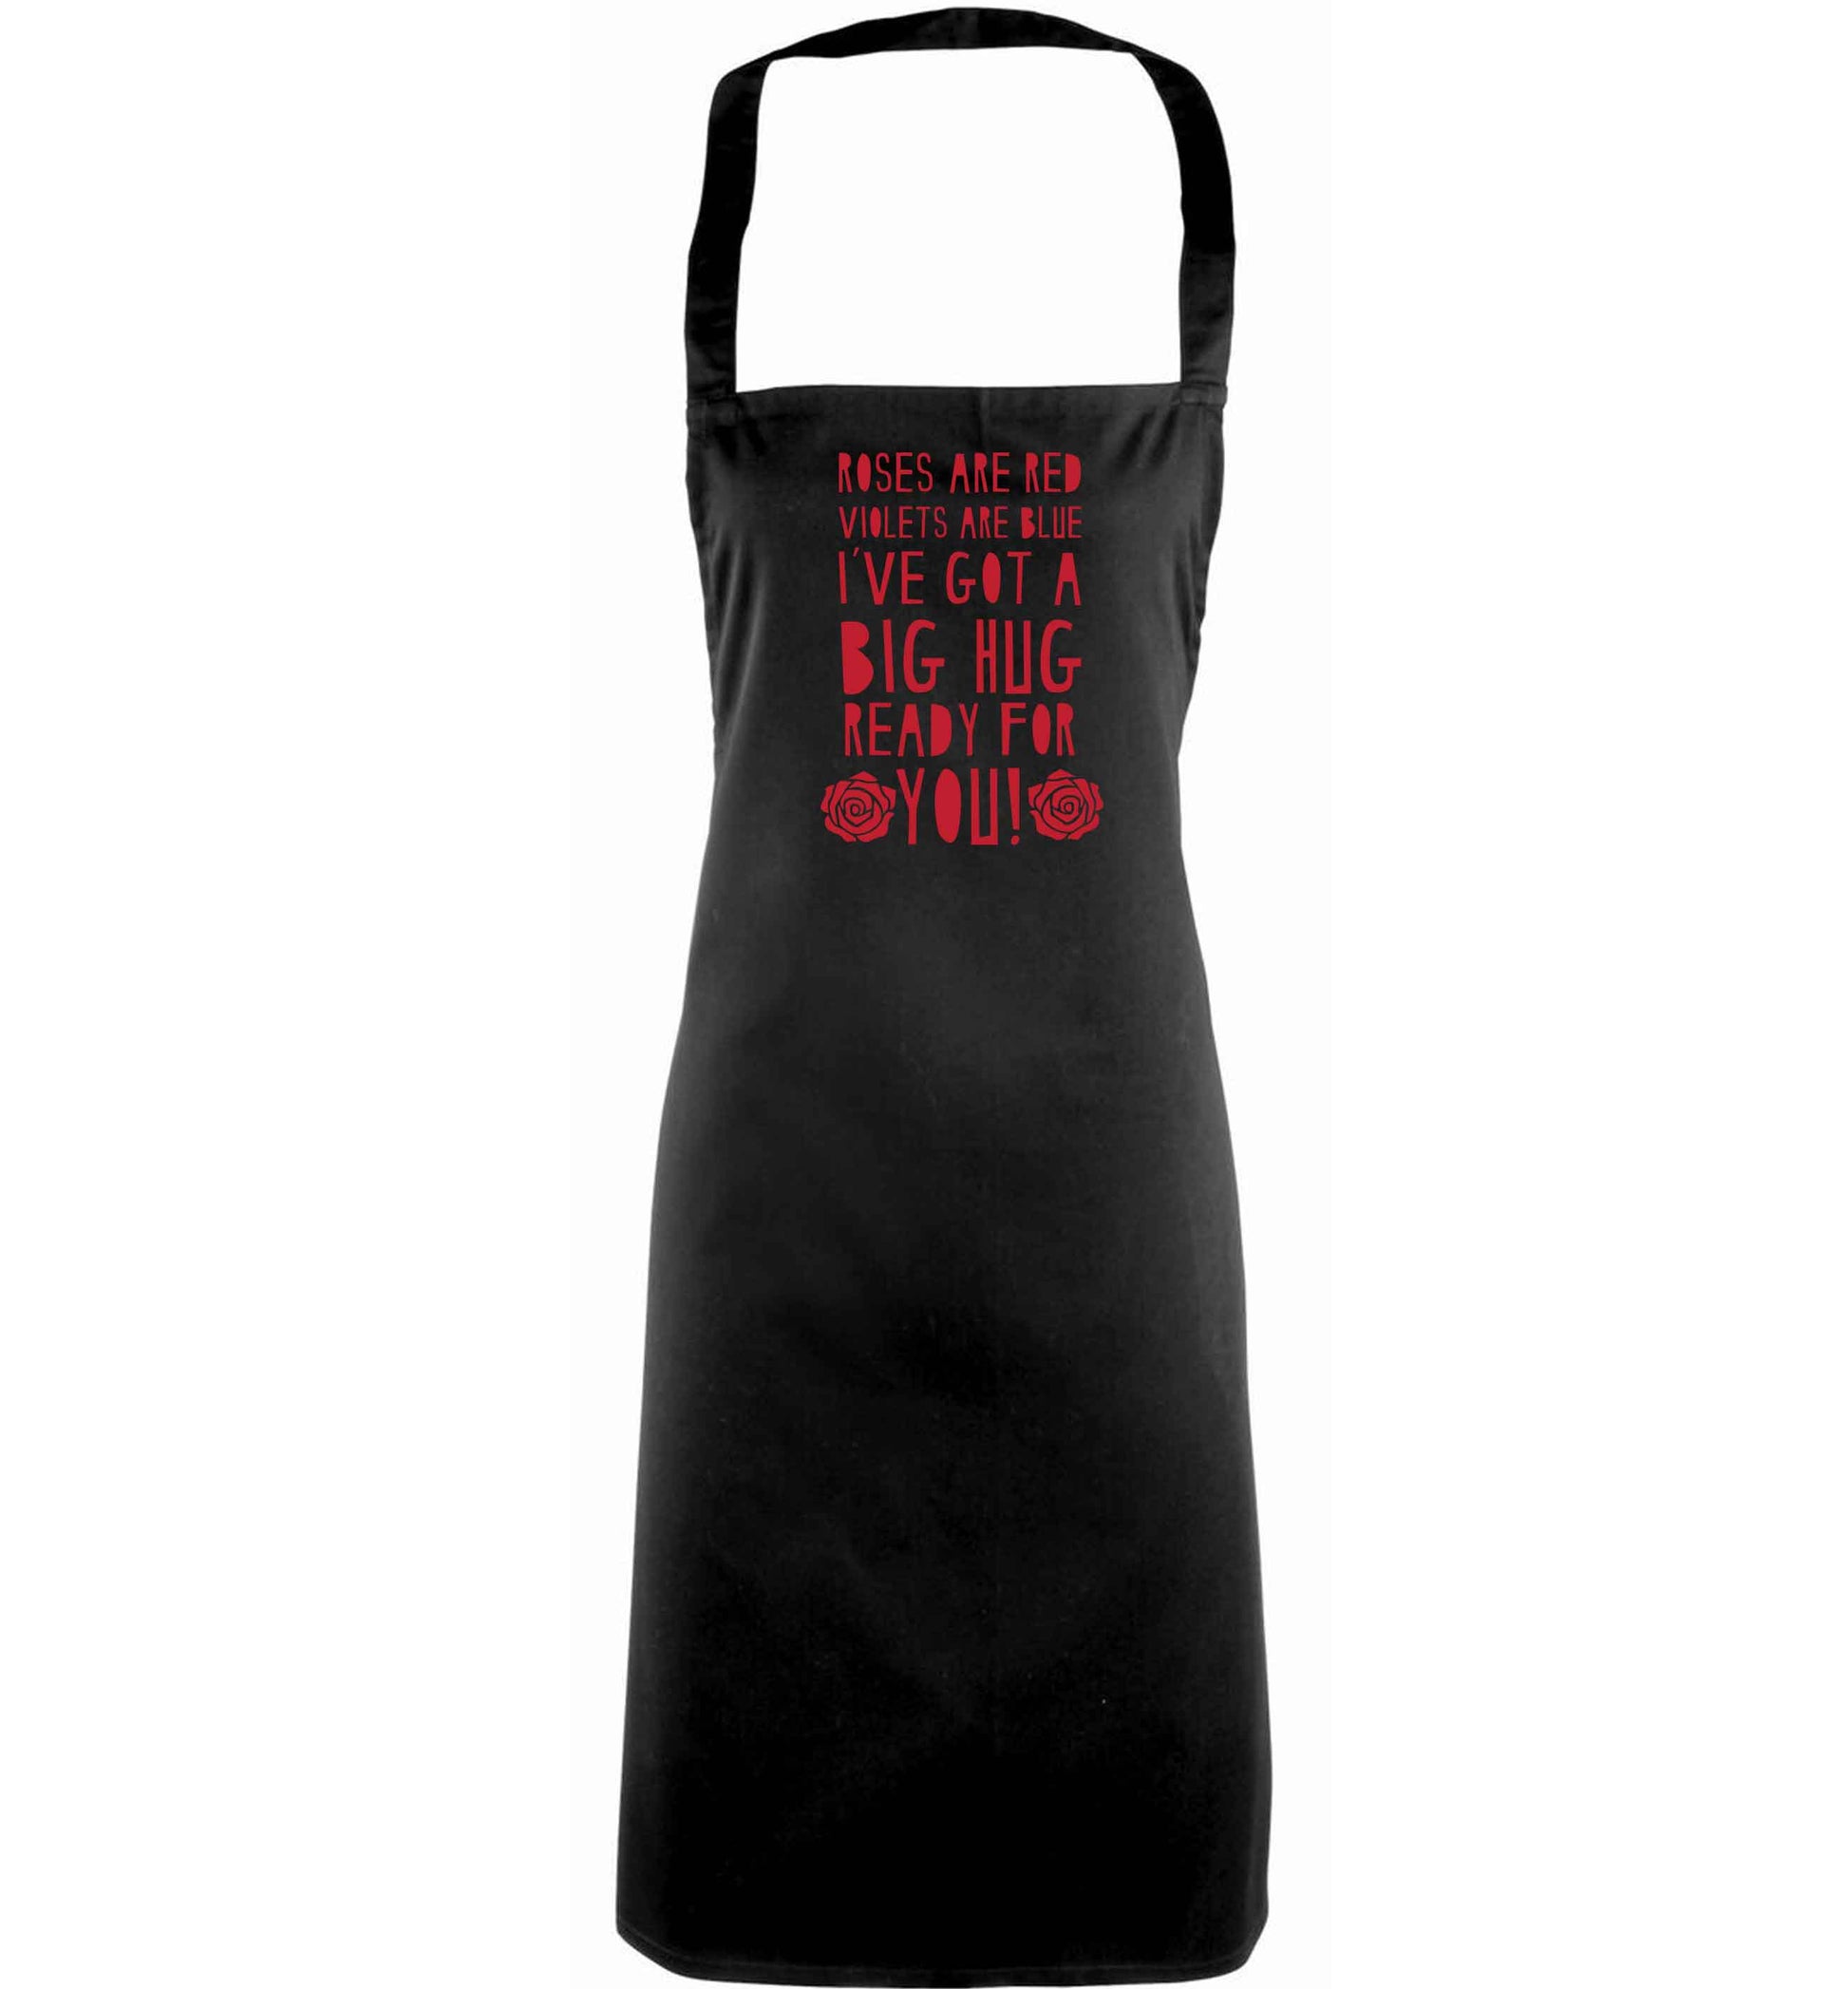 Roses are red violets are blue I've got a big hug coming for you adults black apron